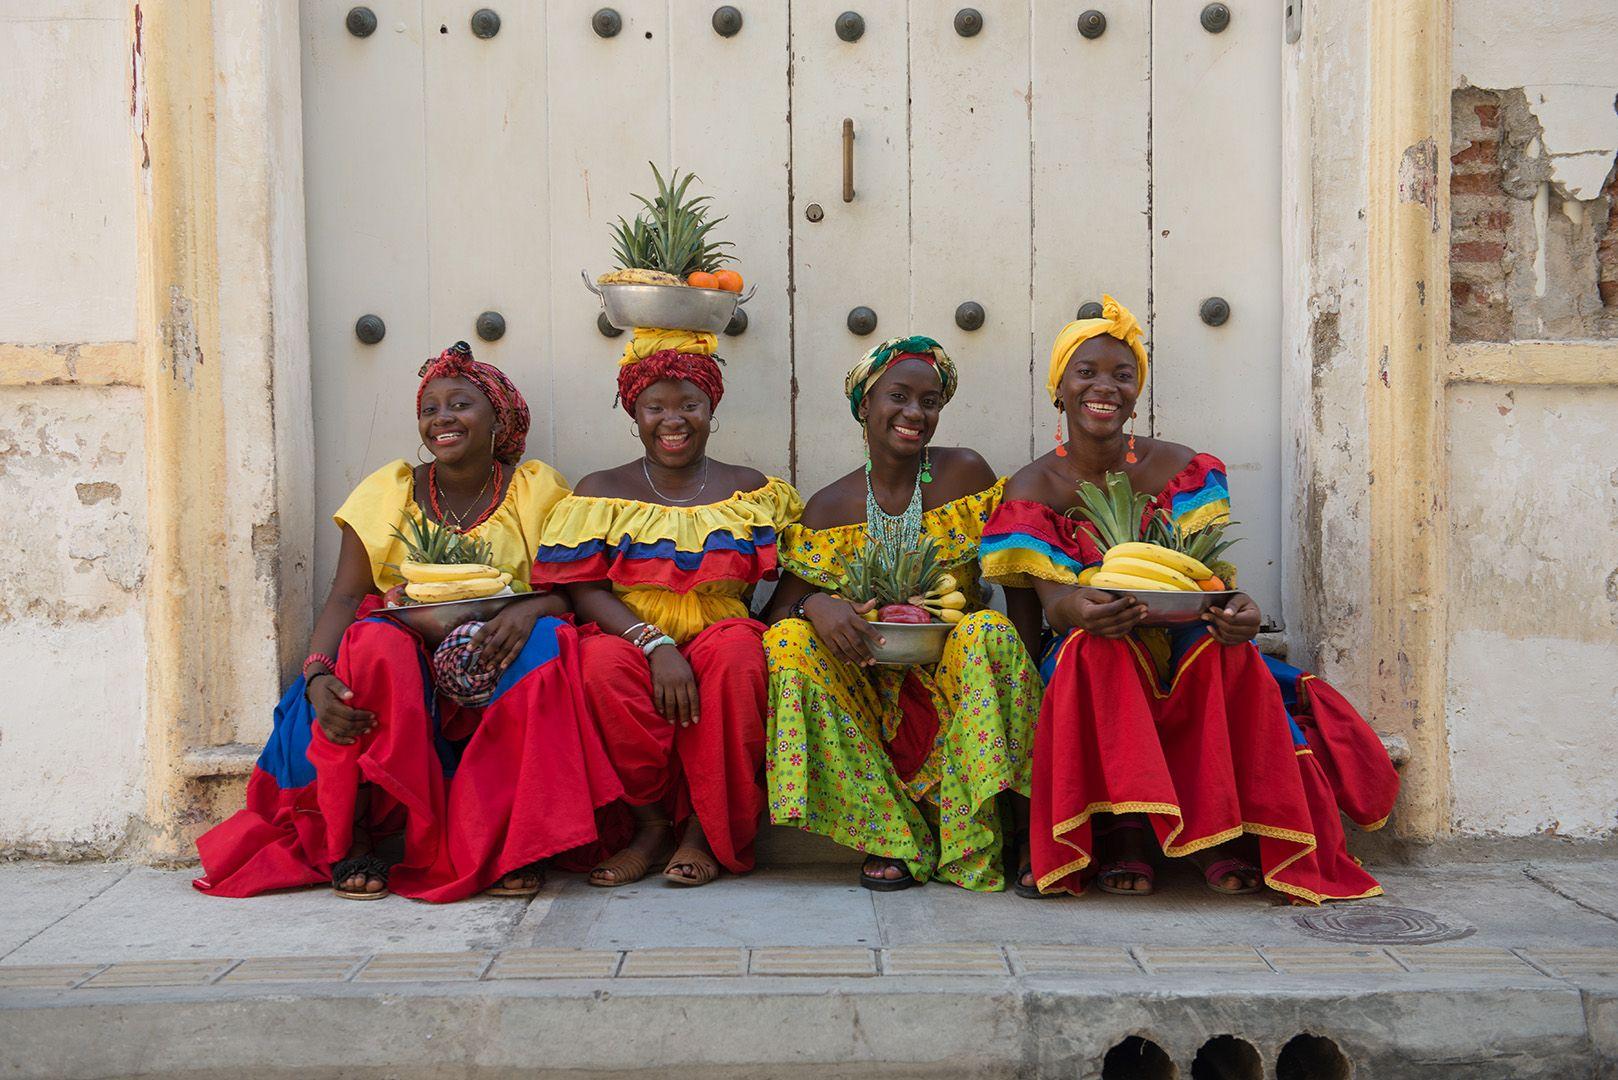 Lou Vest Color Photograph - Four Palenqueras - Cartagena, Colombia fruit sellers in red, yellow & blue